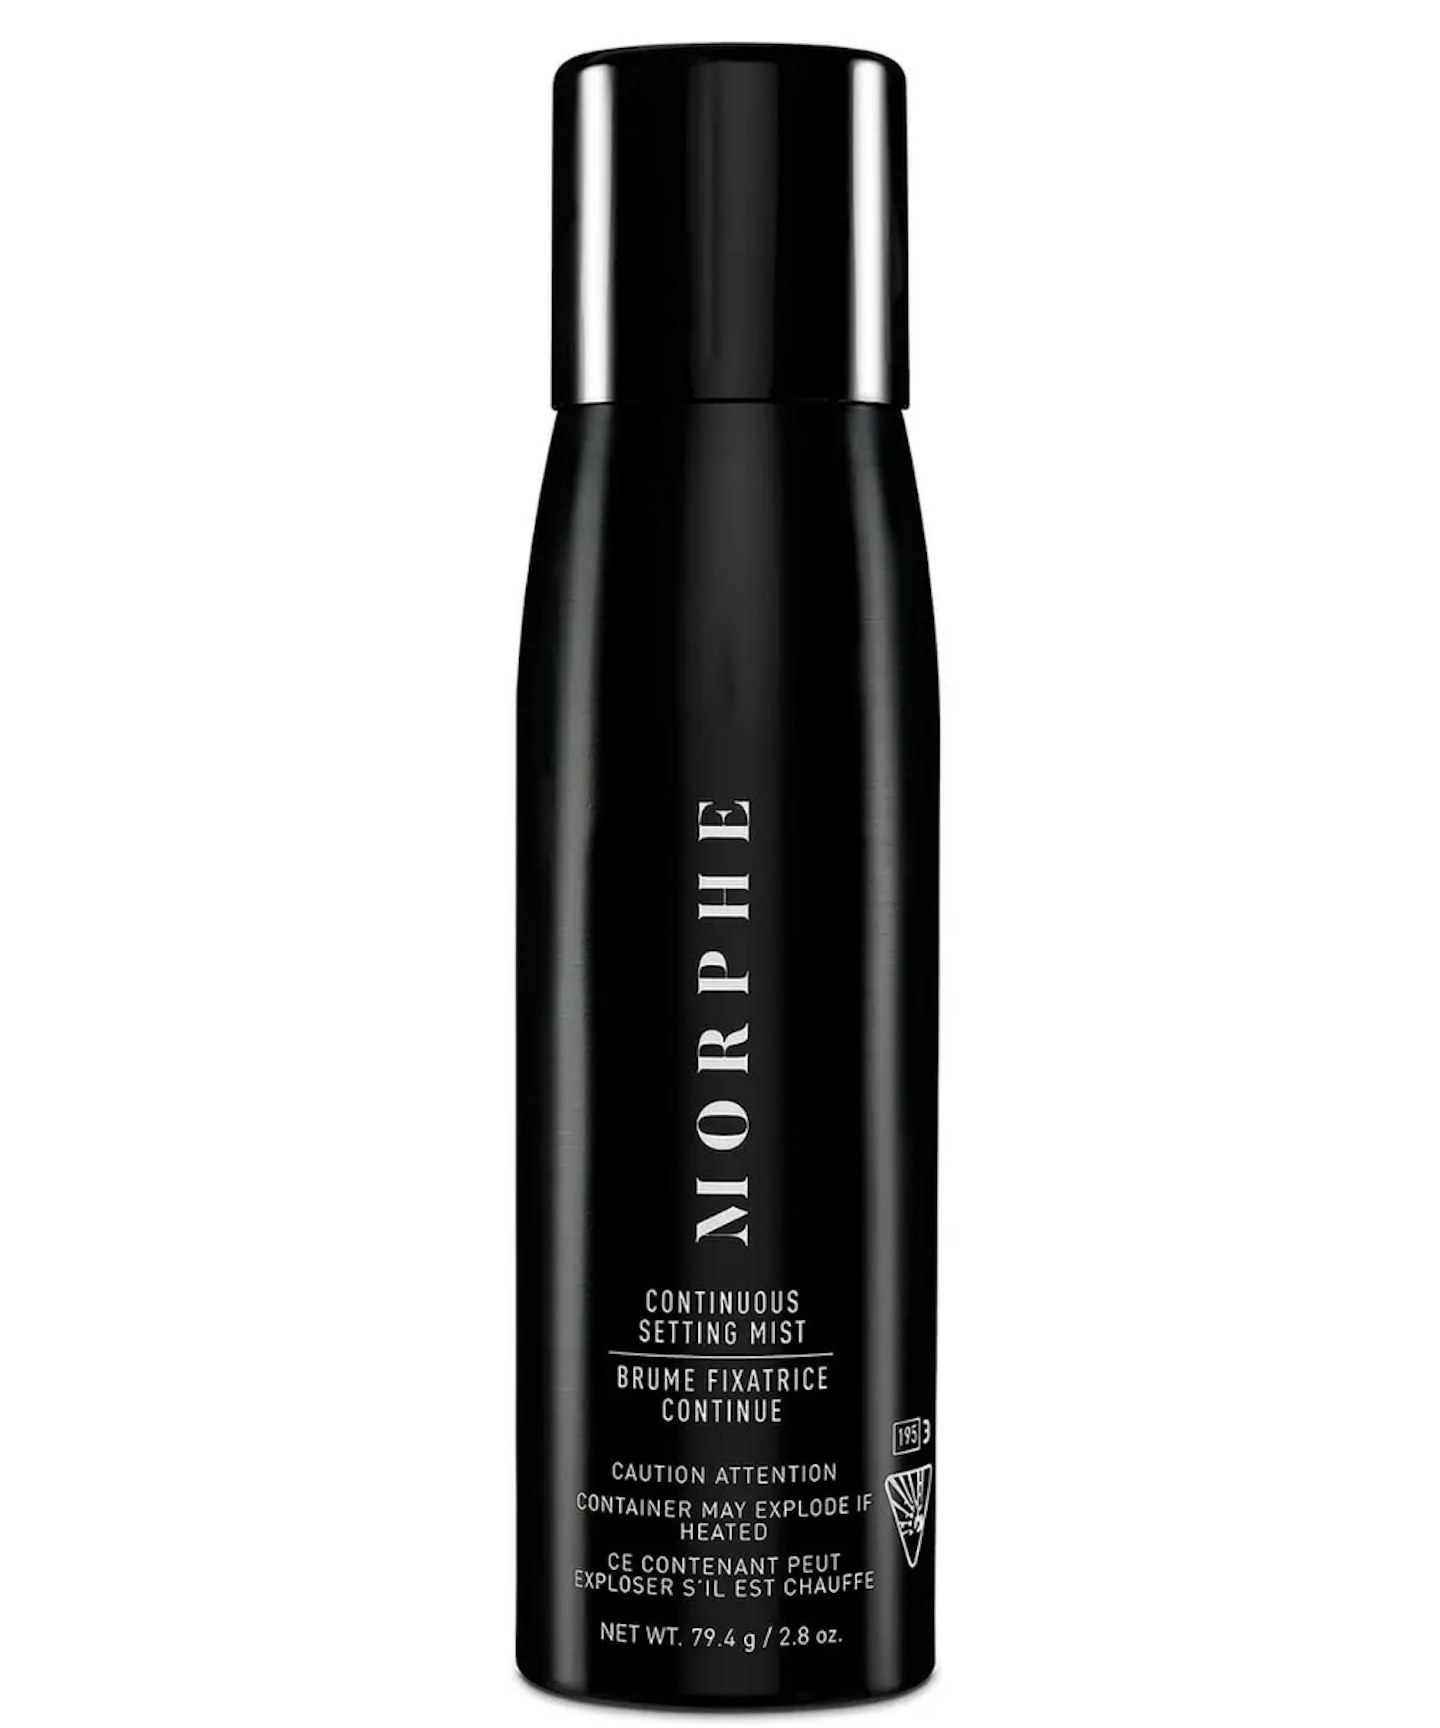 A picture of the Morphe Continuous Setting Mist